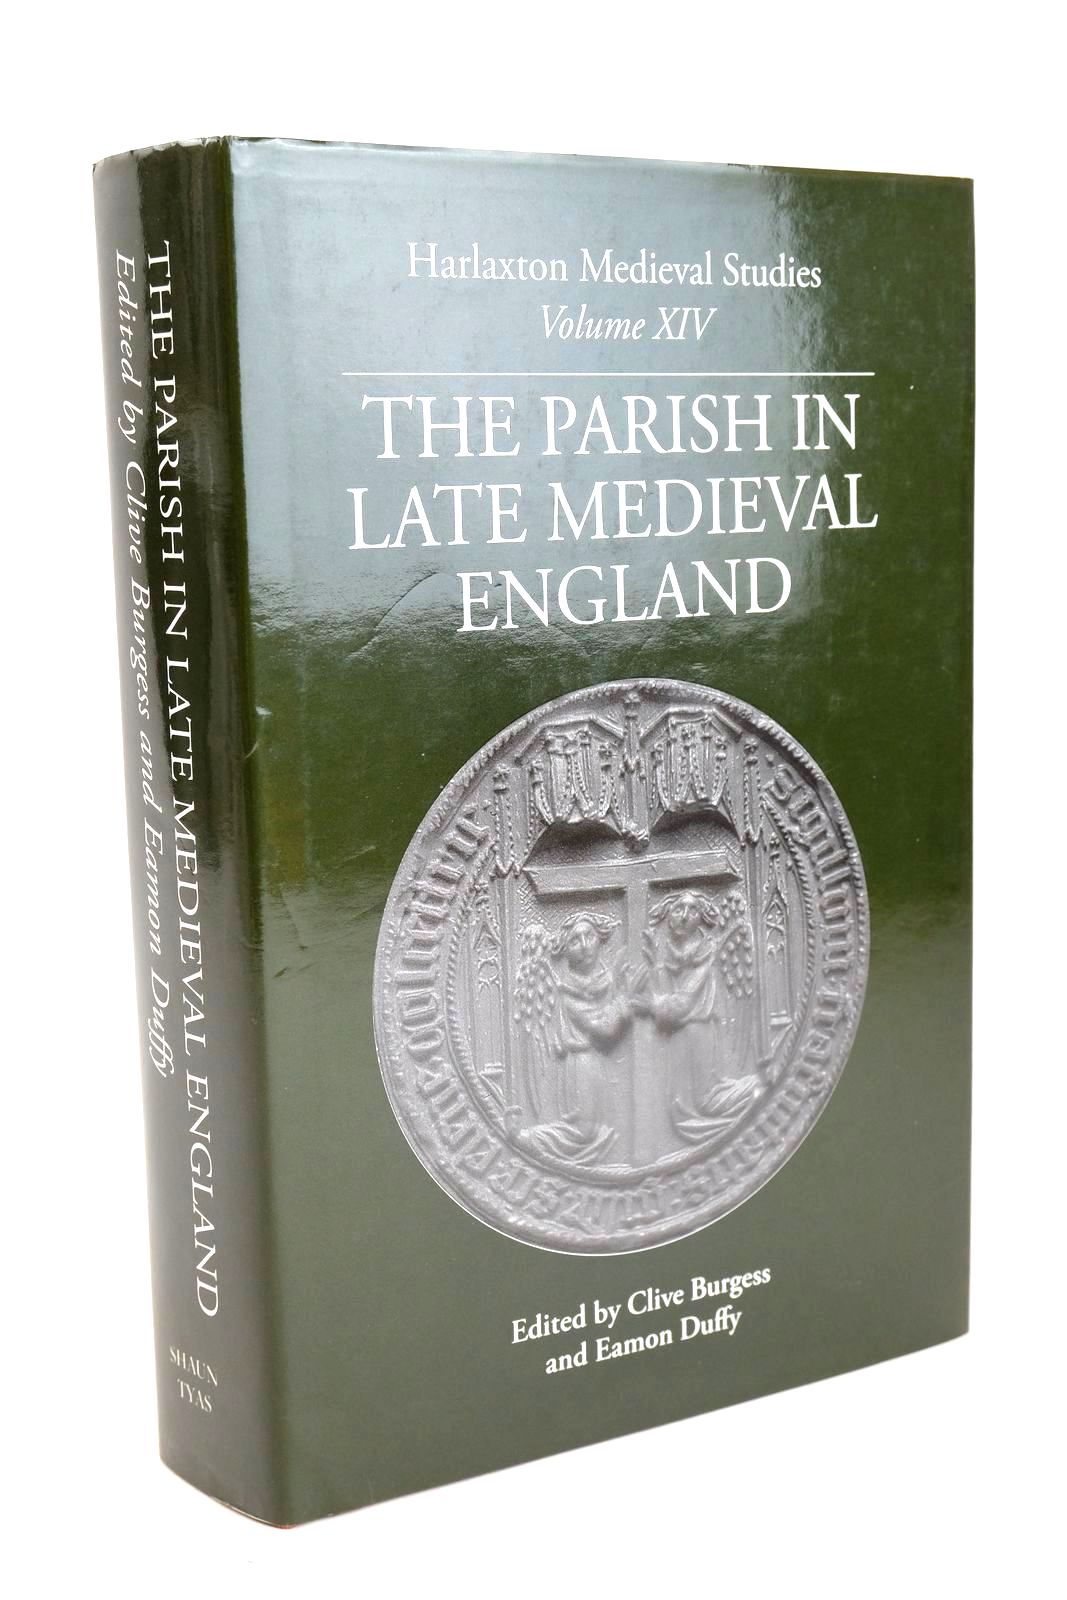 Photo of THE PARISH IN LATE MEDIEVAL ENGLAND (HARLAXTON MEDIEVAL STUDIES XIV) written by Burgess, Clive Duffy, Eamon published by Shaun Tyas (STOCK CODE: 1327715)  for sale by Stella & Rose's Books